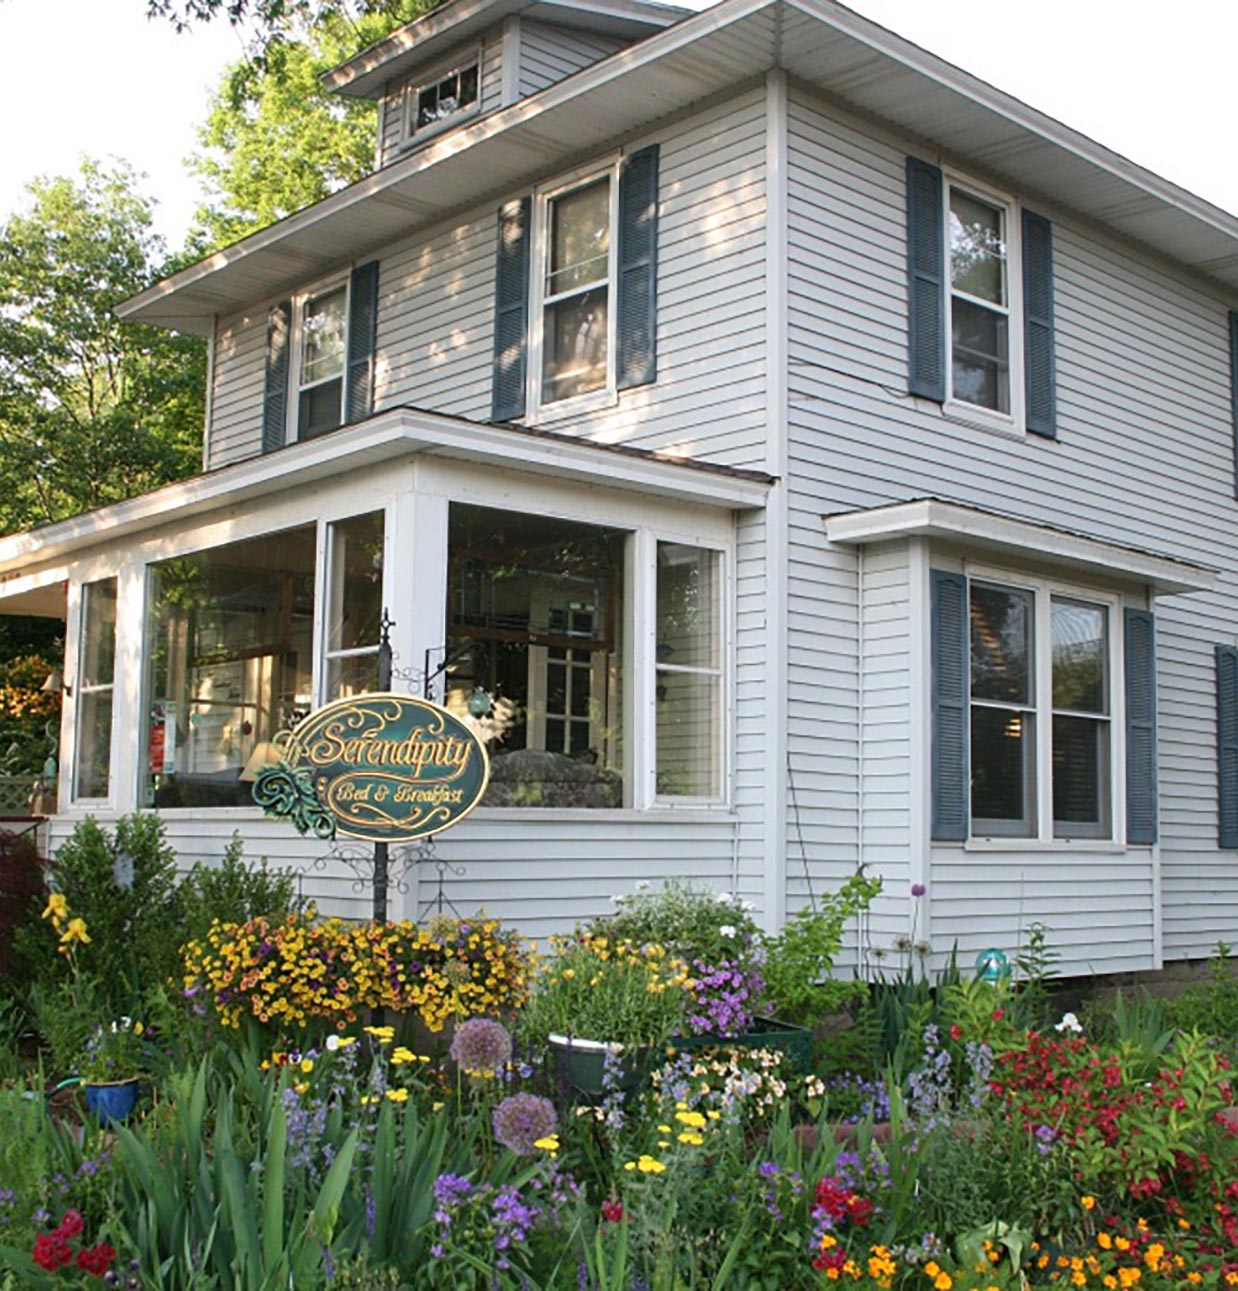 Exterior and front gardens of Serendipity Bed & Breakfast in downtown Saugatuck, MI